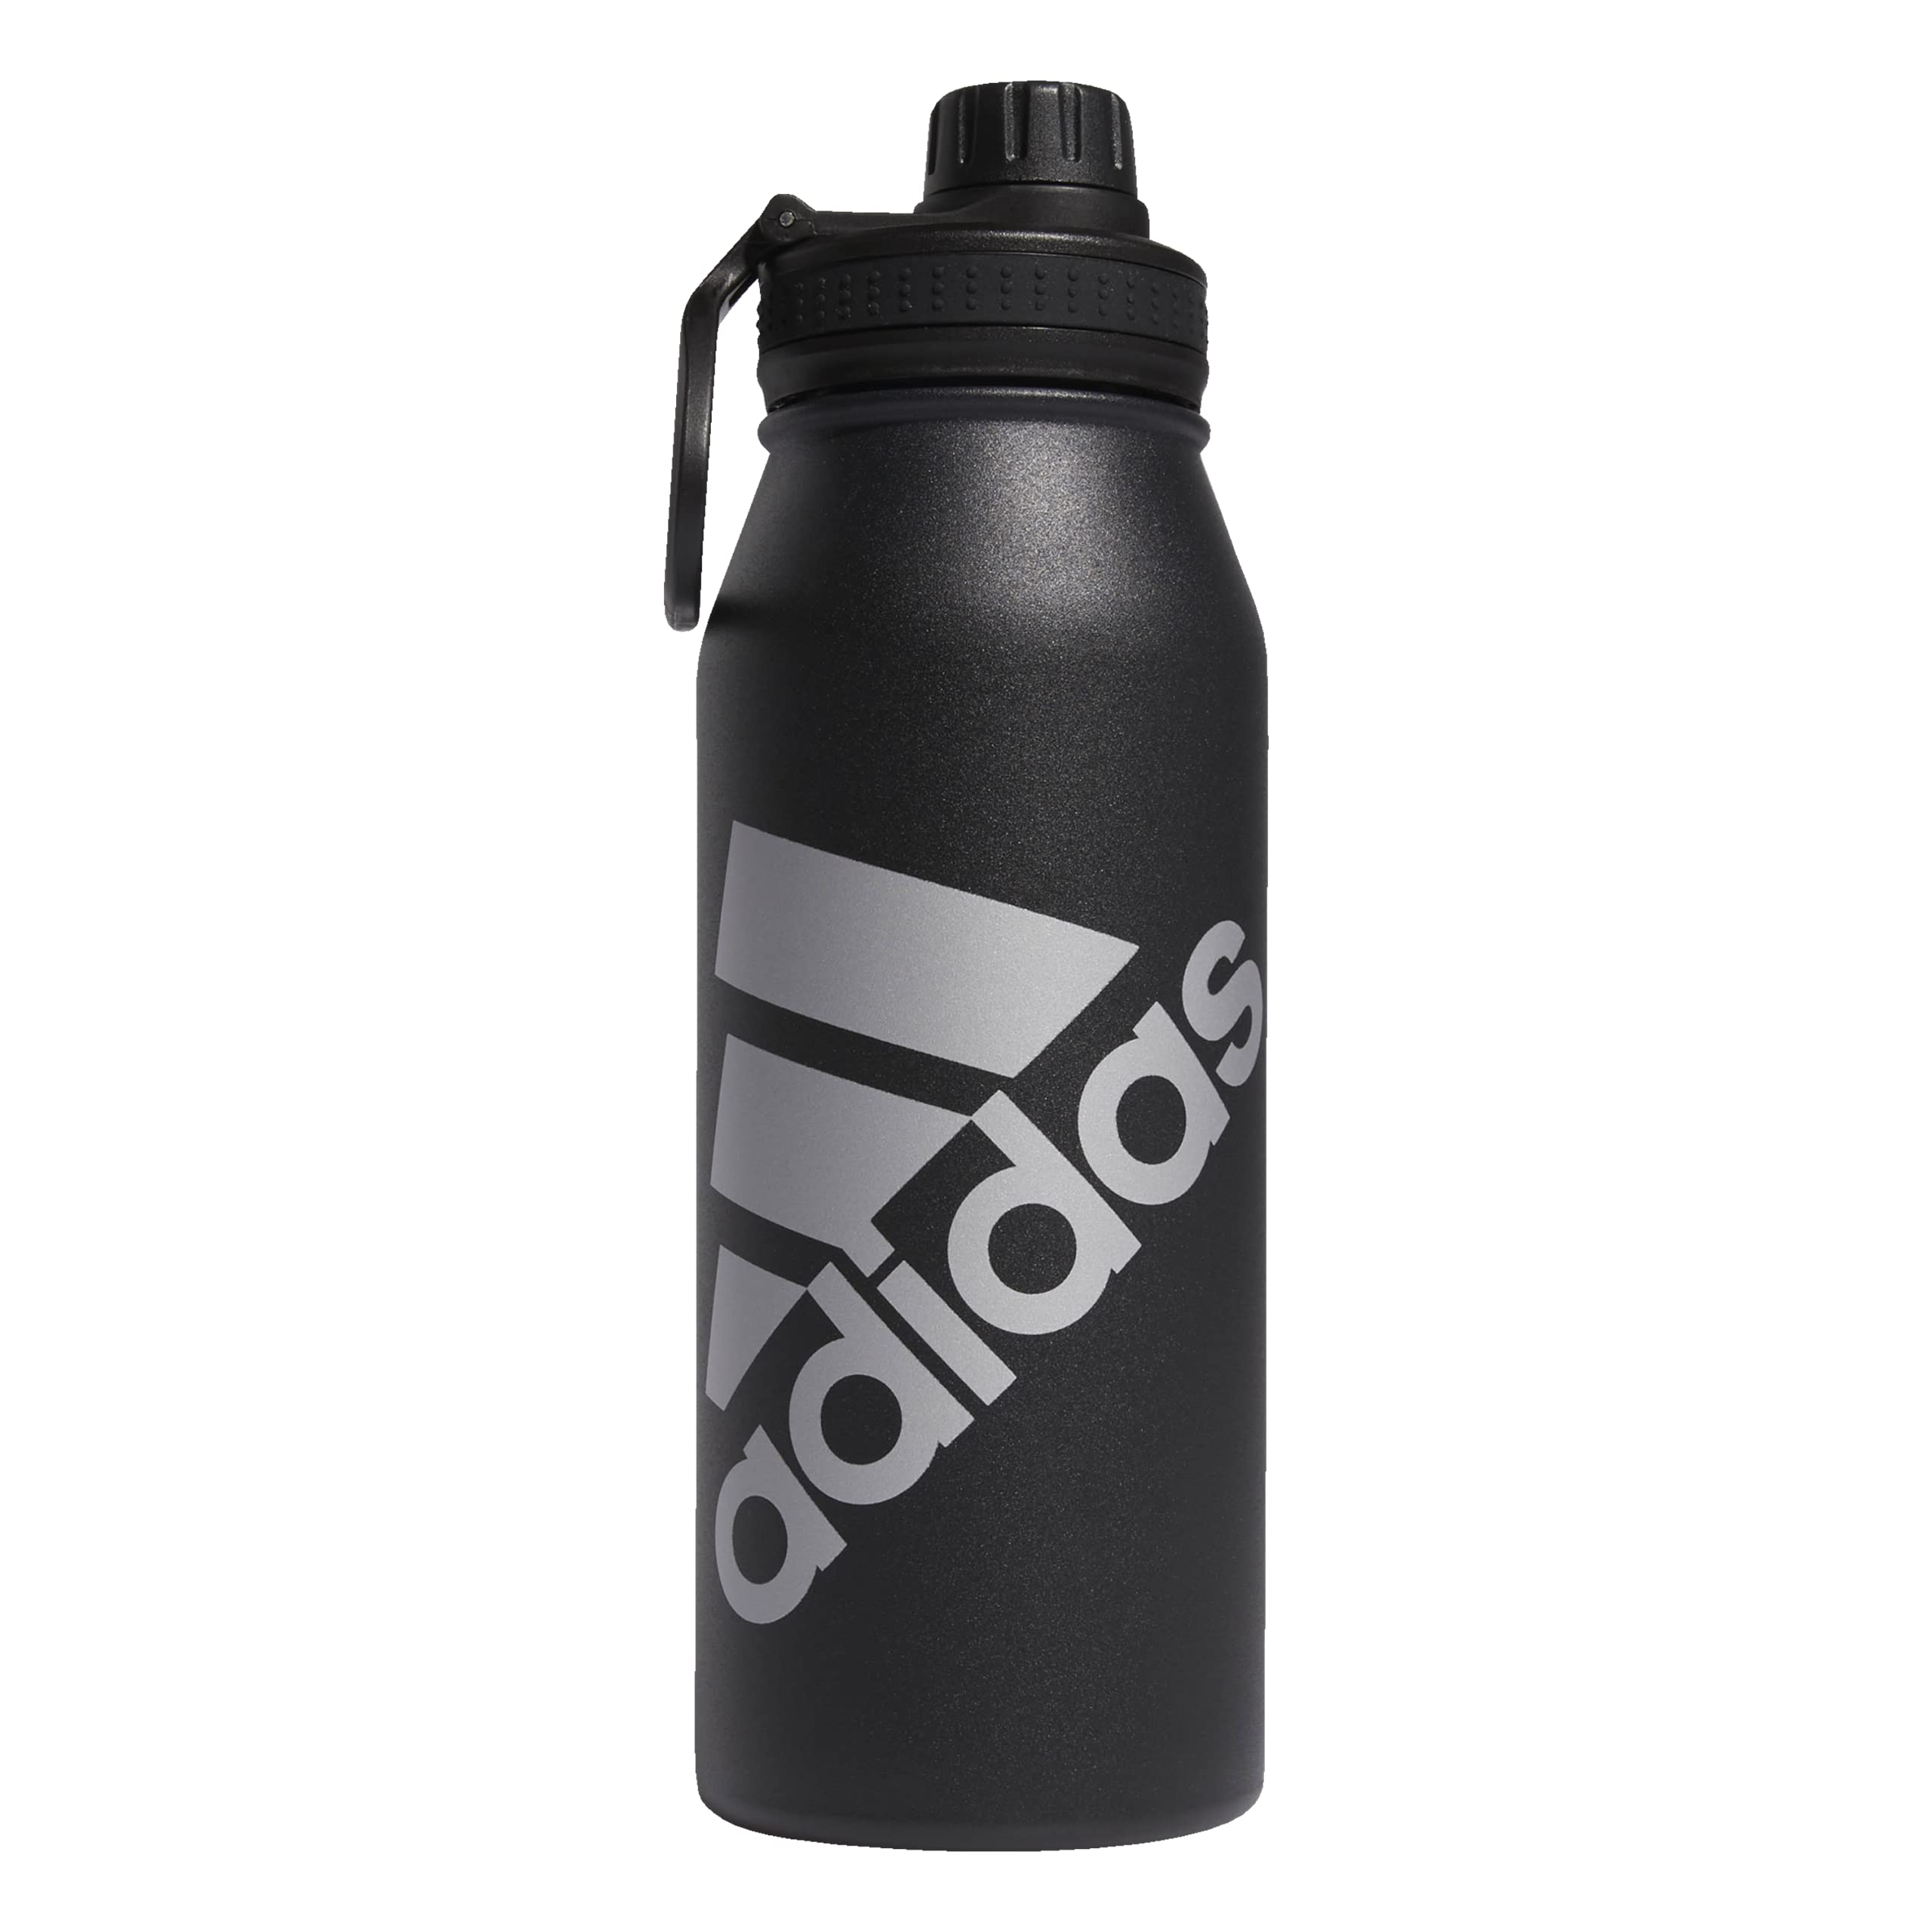 32-Oz adidas Stainless Steel Water Bottle (Black/Silver) $17 + Free Shipping w/ Prime or on $35+